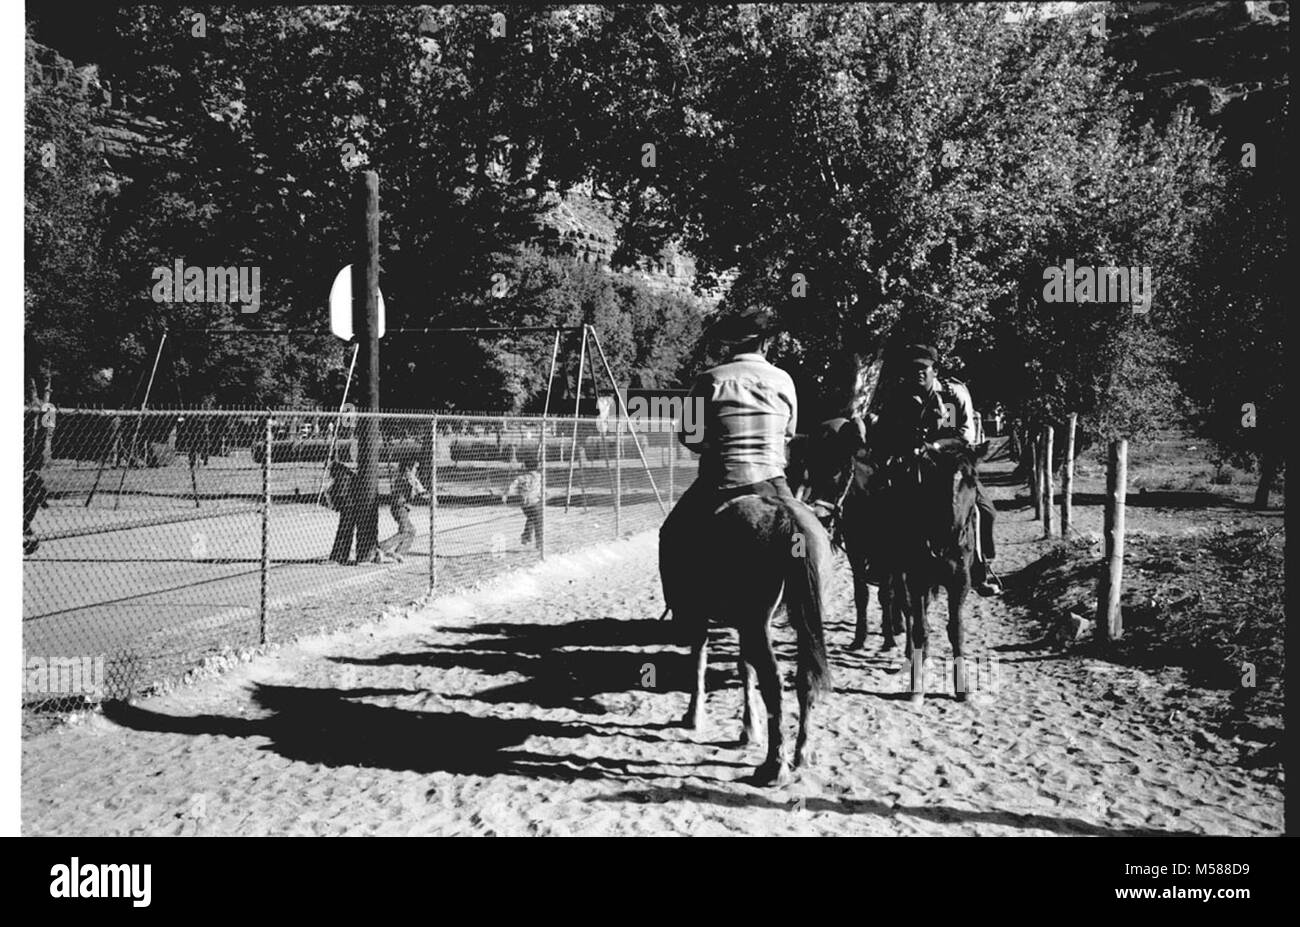 Grand Canyon Historic. SUPAI MEN ON HORSES, RIDING CHILDREN PLAYING IN PLAYGROUND, WHEN THE CAMPGROUND AT HAVASU HAVASUPAI WHEN ADMINISTERED GRCA GRAND CANYON NATIONAL PARK, CIRCA 1977, Stock Photo